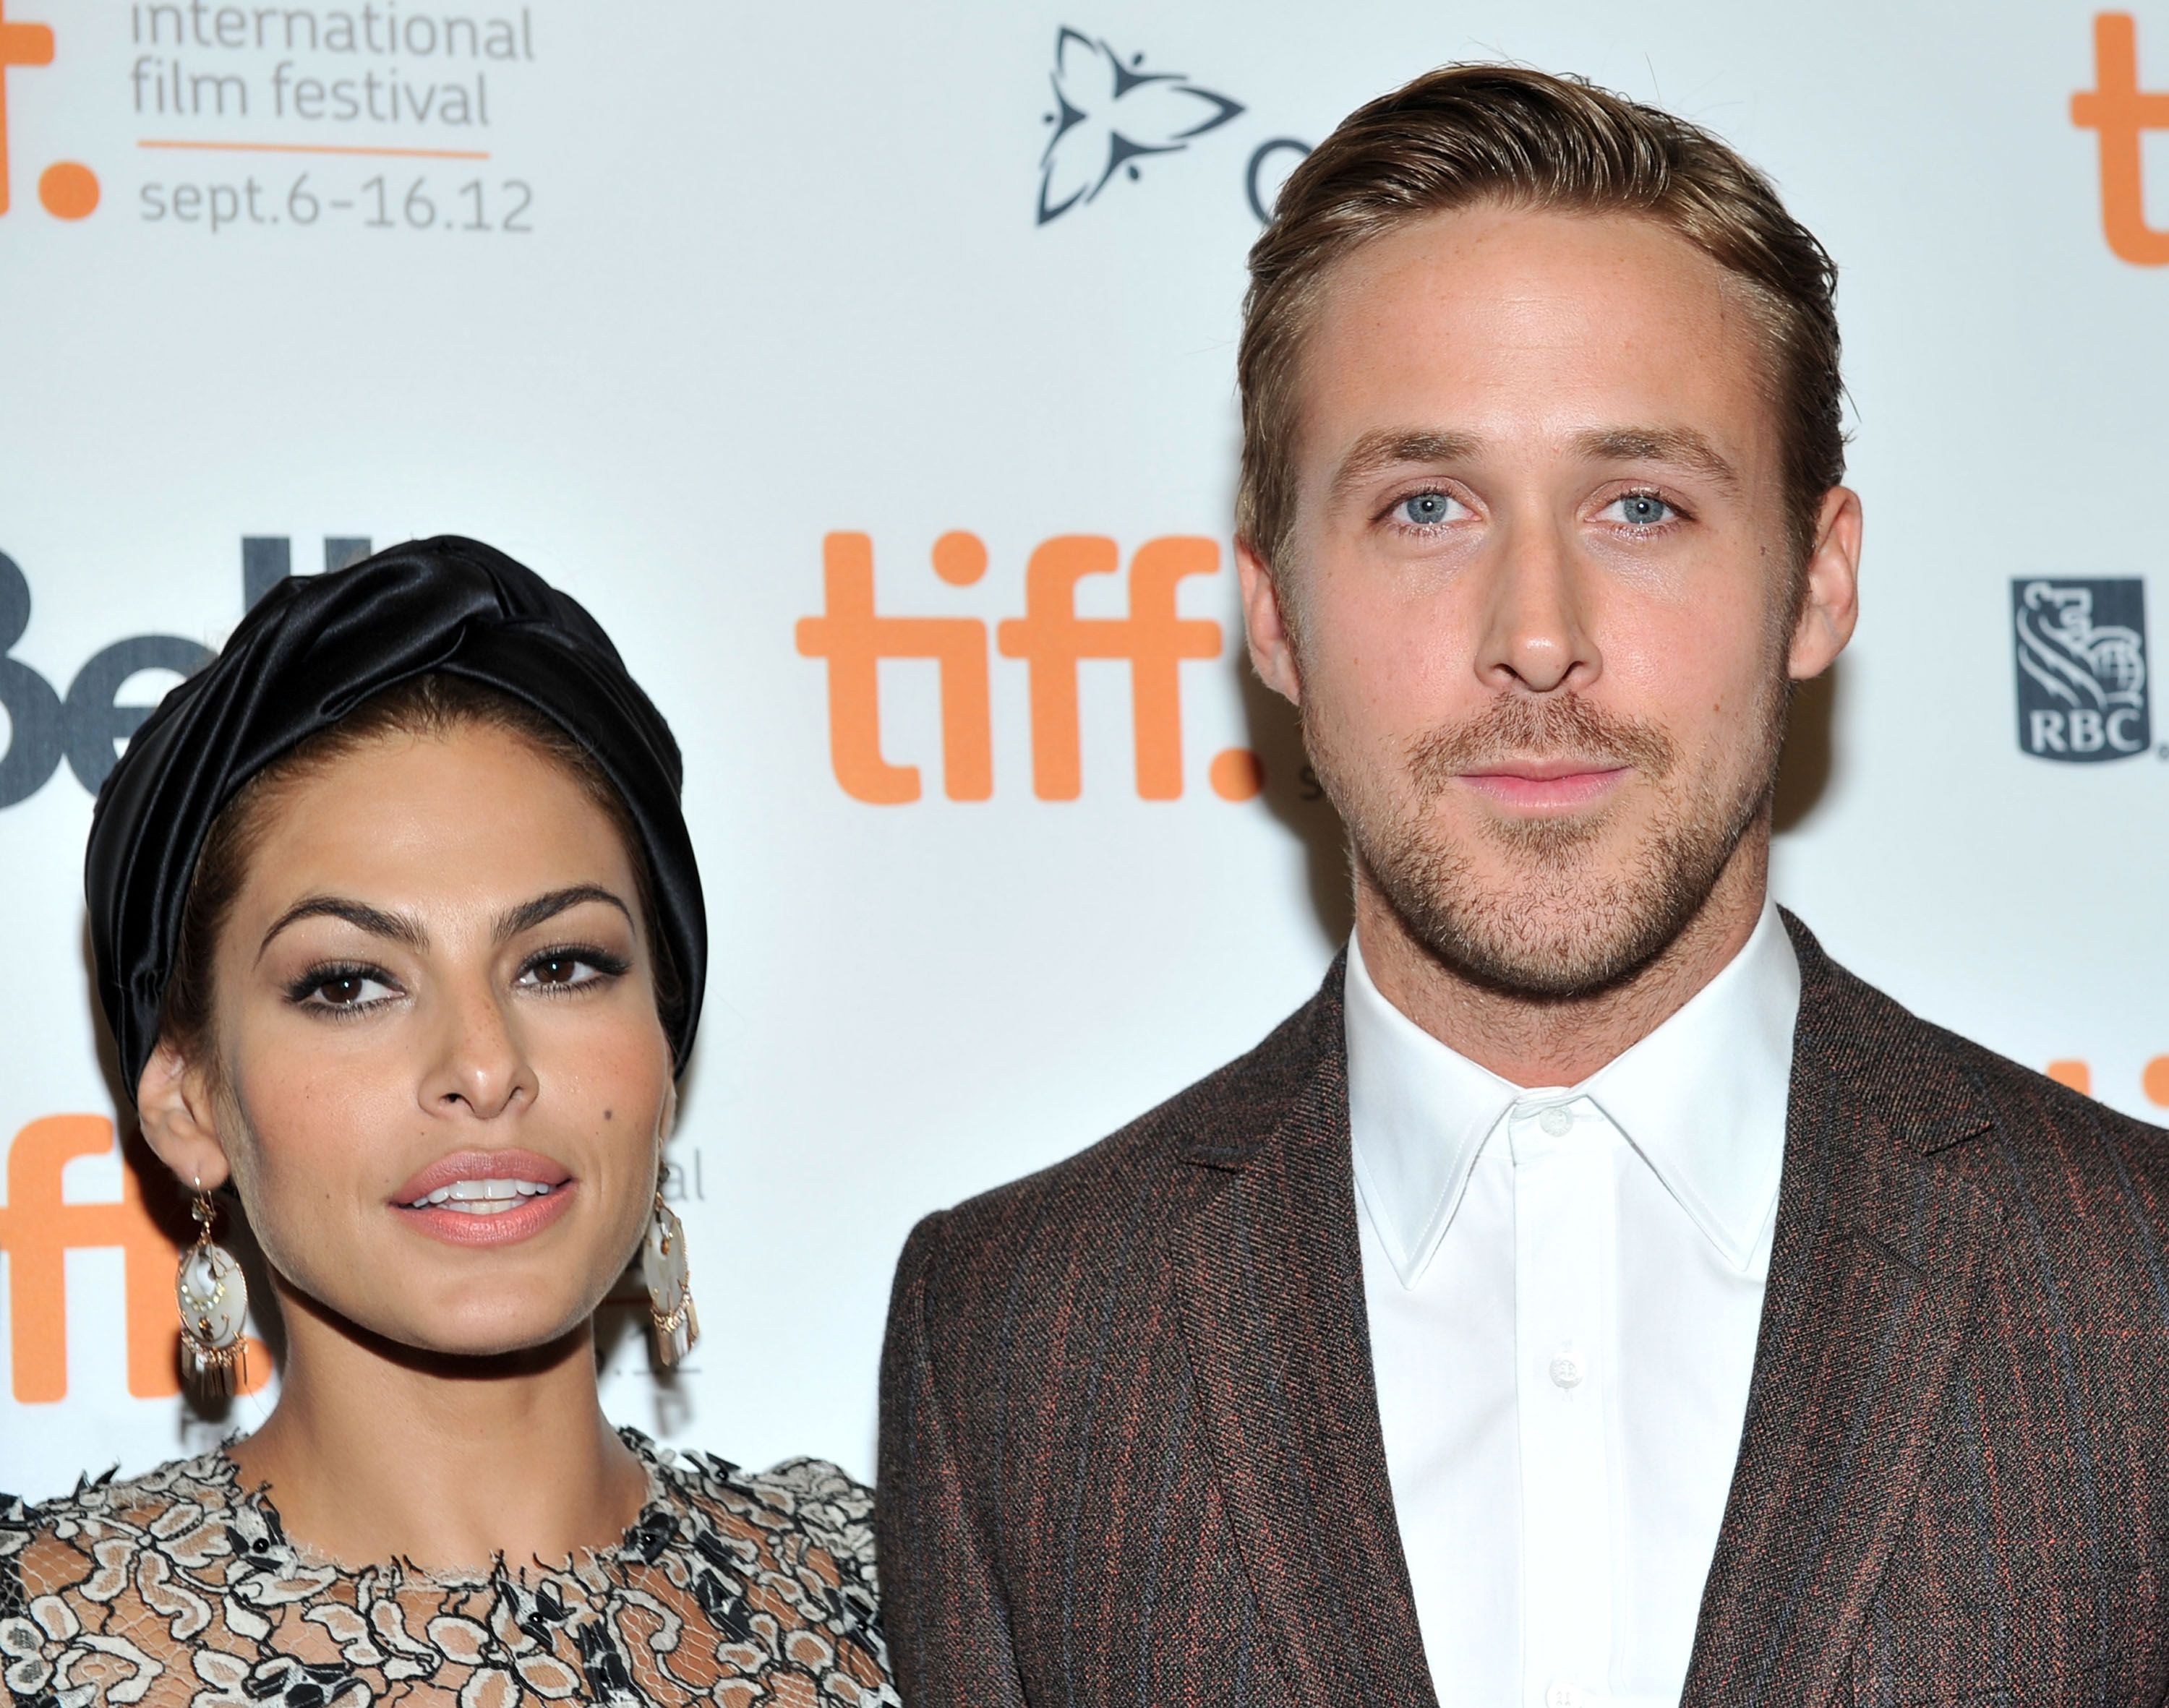 Why Eva Mendes Quit Her Career in Hollywood – The Reason Points to Ryan Gosling